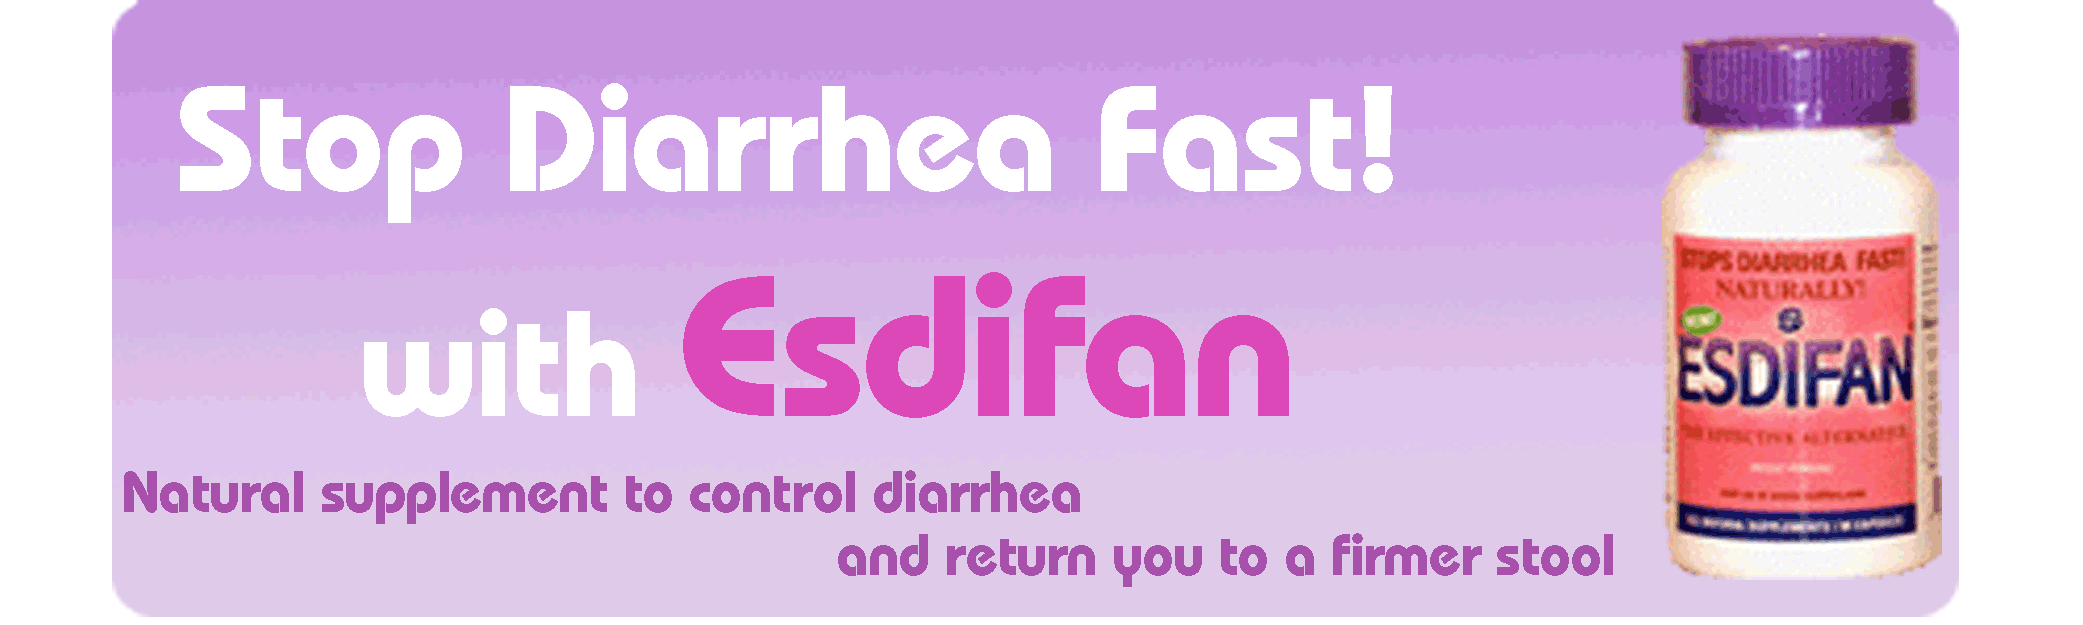 Stop Diarrhea fast with Esdifan